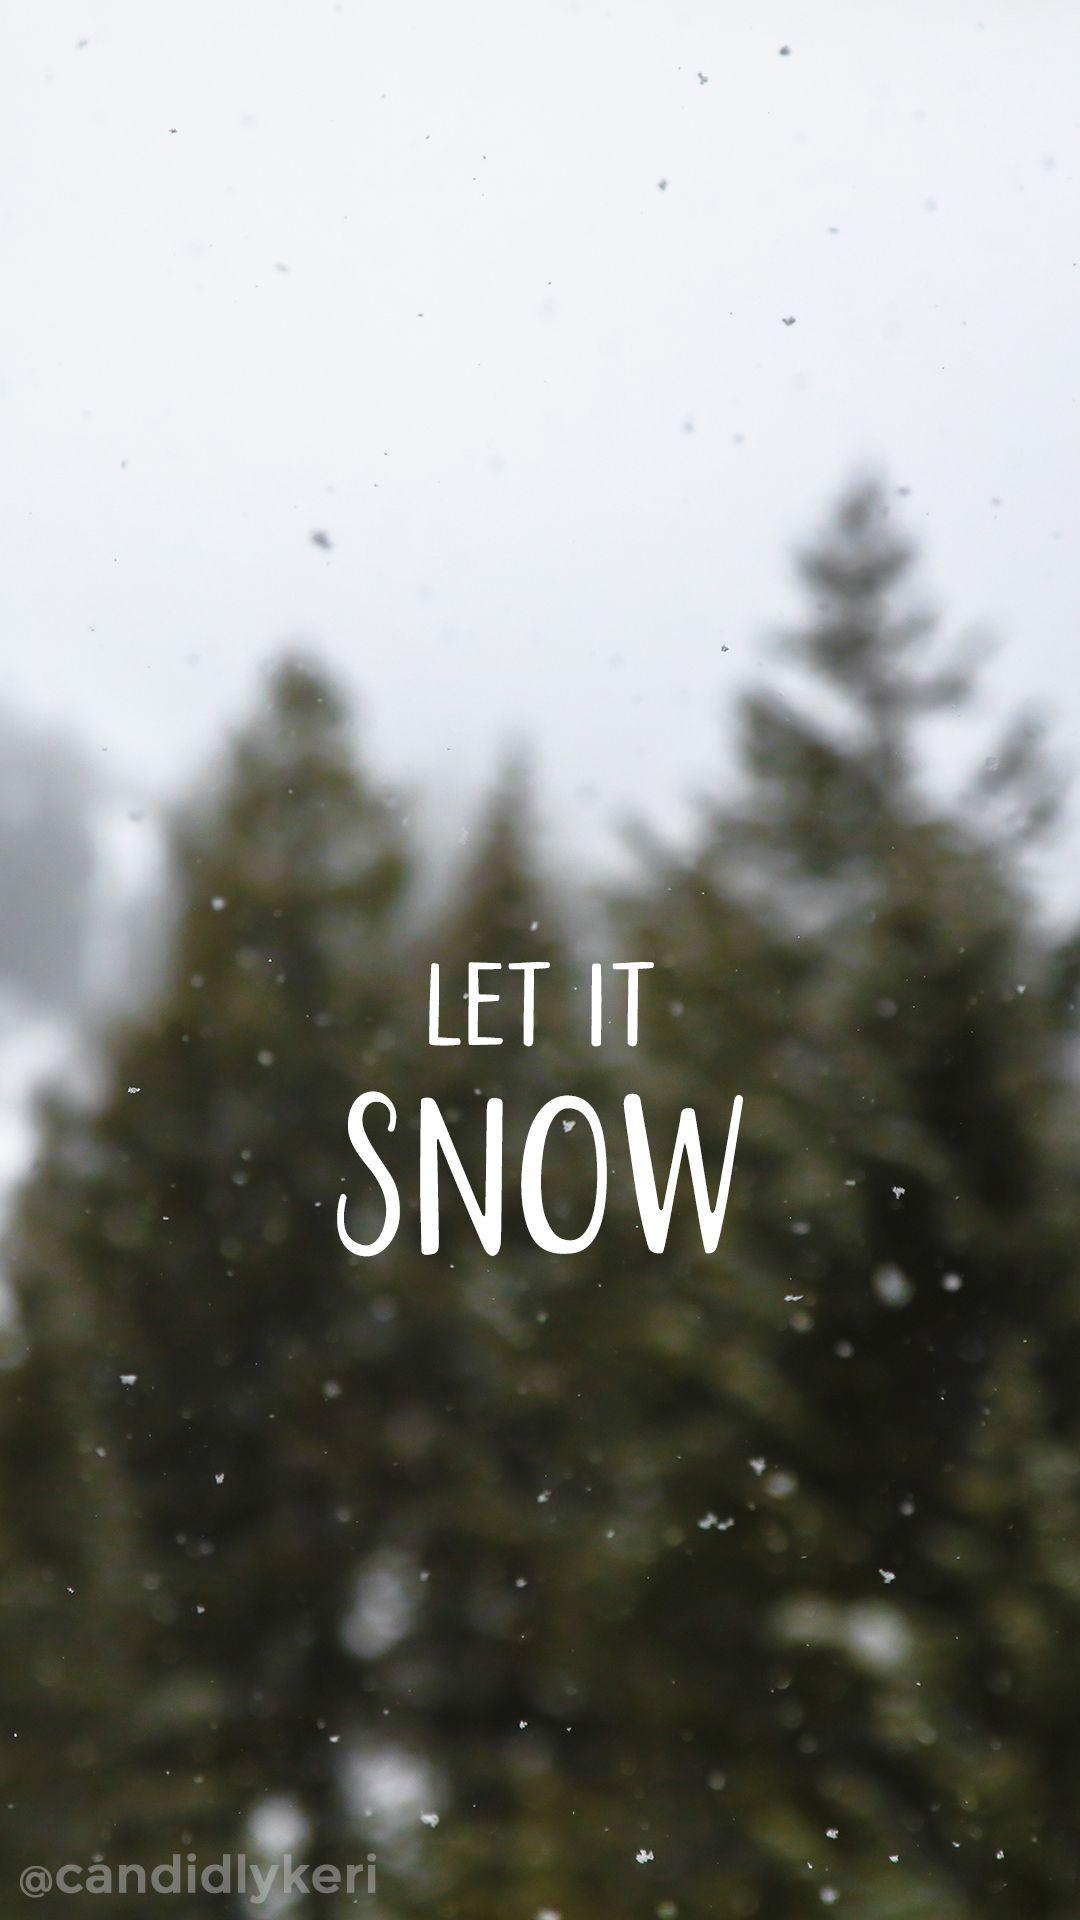 Let it snow, snow nature background wallpaper you can download for free on the blog! For any dev. Рождественские обои, Рождественский фон, Рождественские картинки